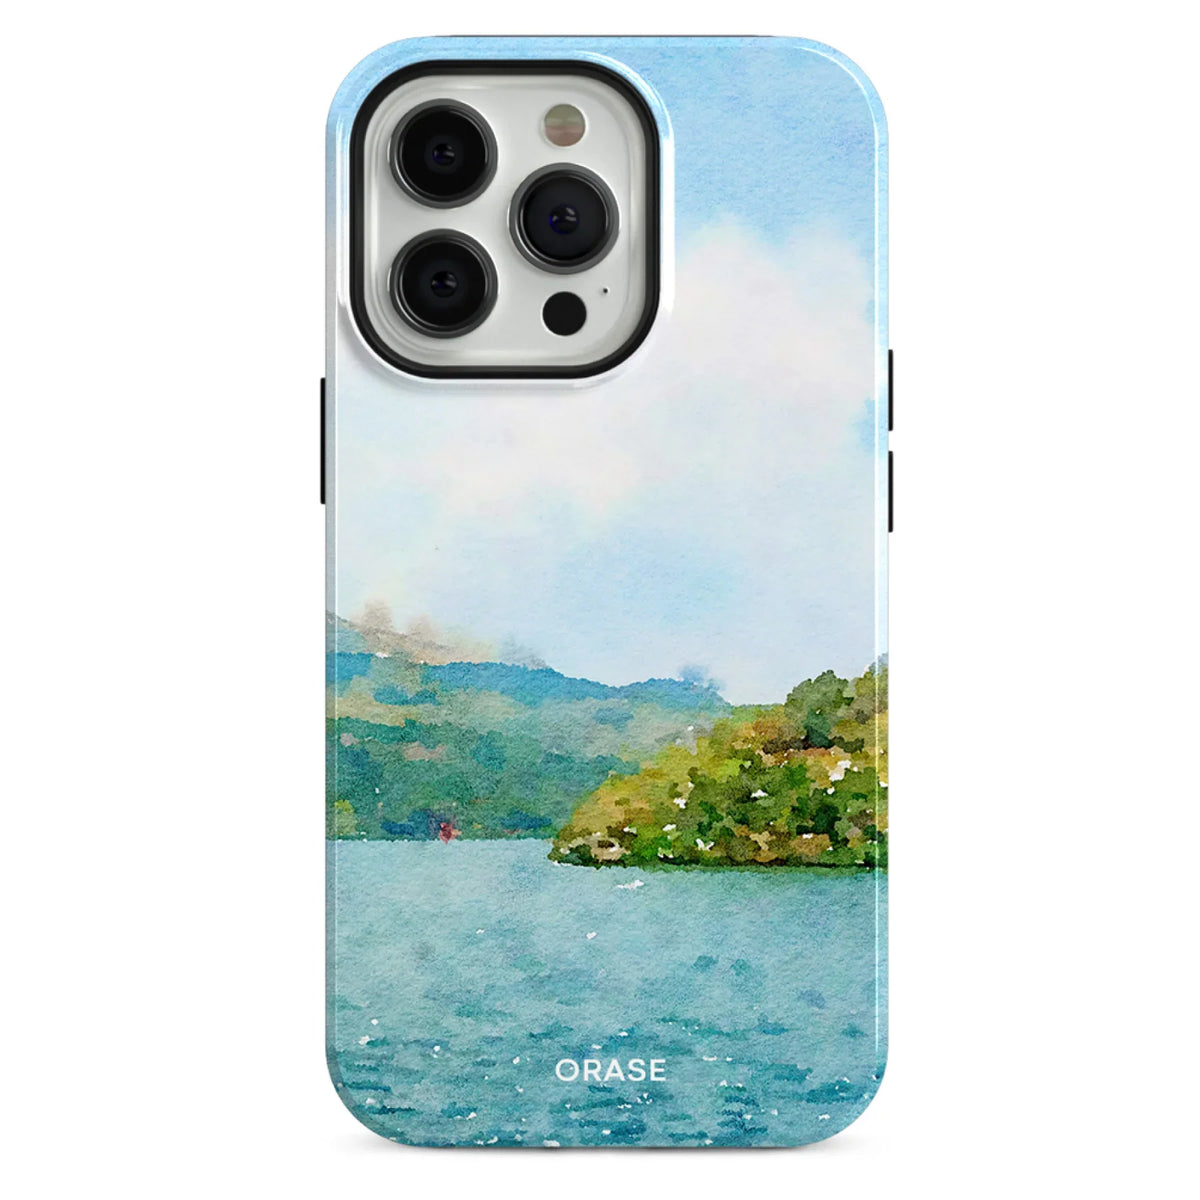 Dreams Time iPhone Case - iPhone 12 Pro Max